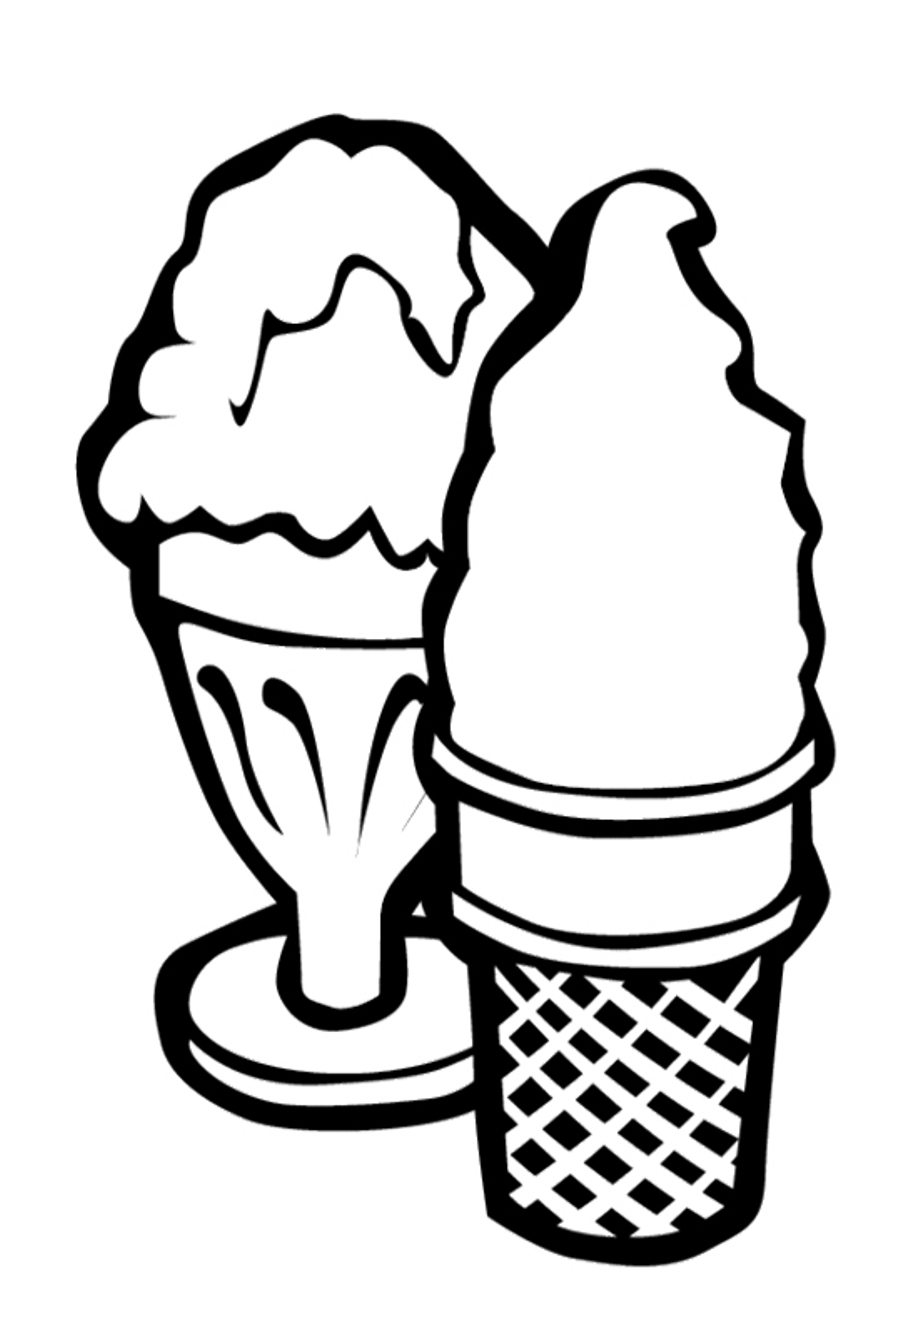 Education Game For Children Coloring Page Cartoon Food Ice Cream